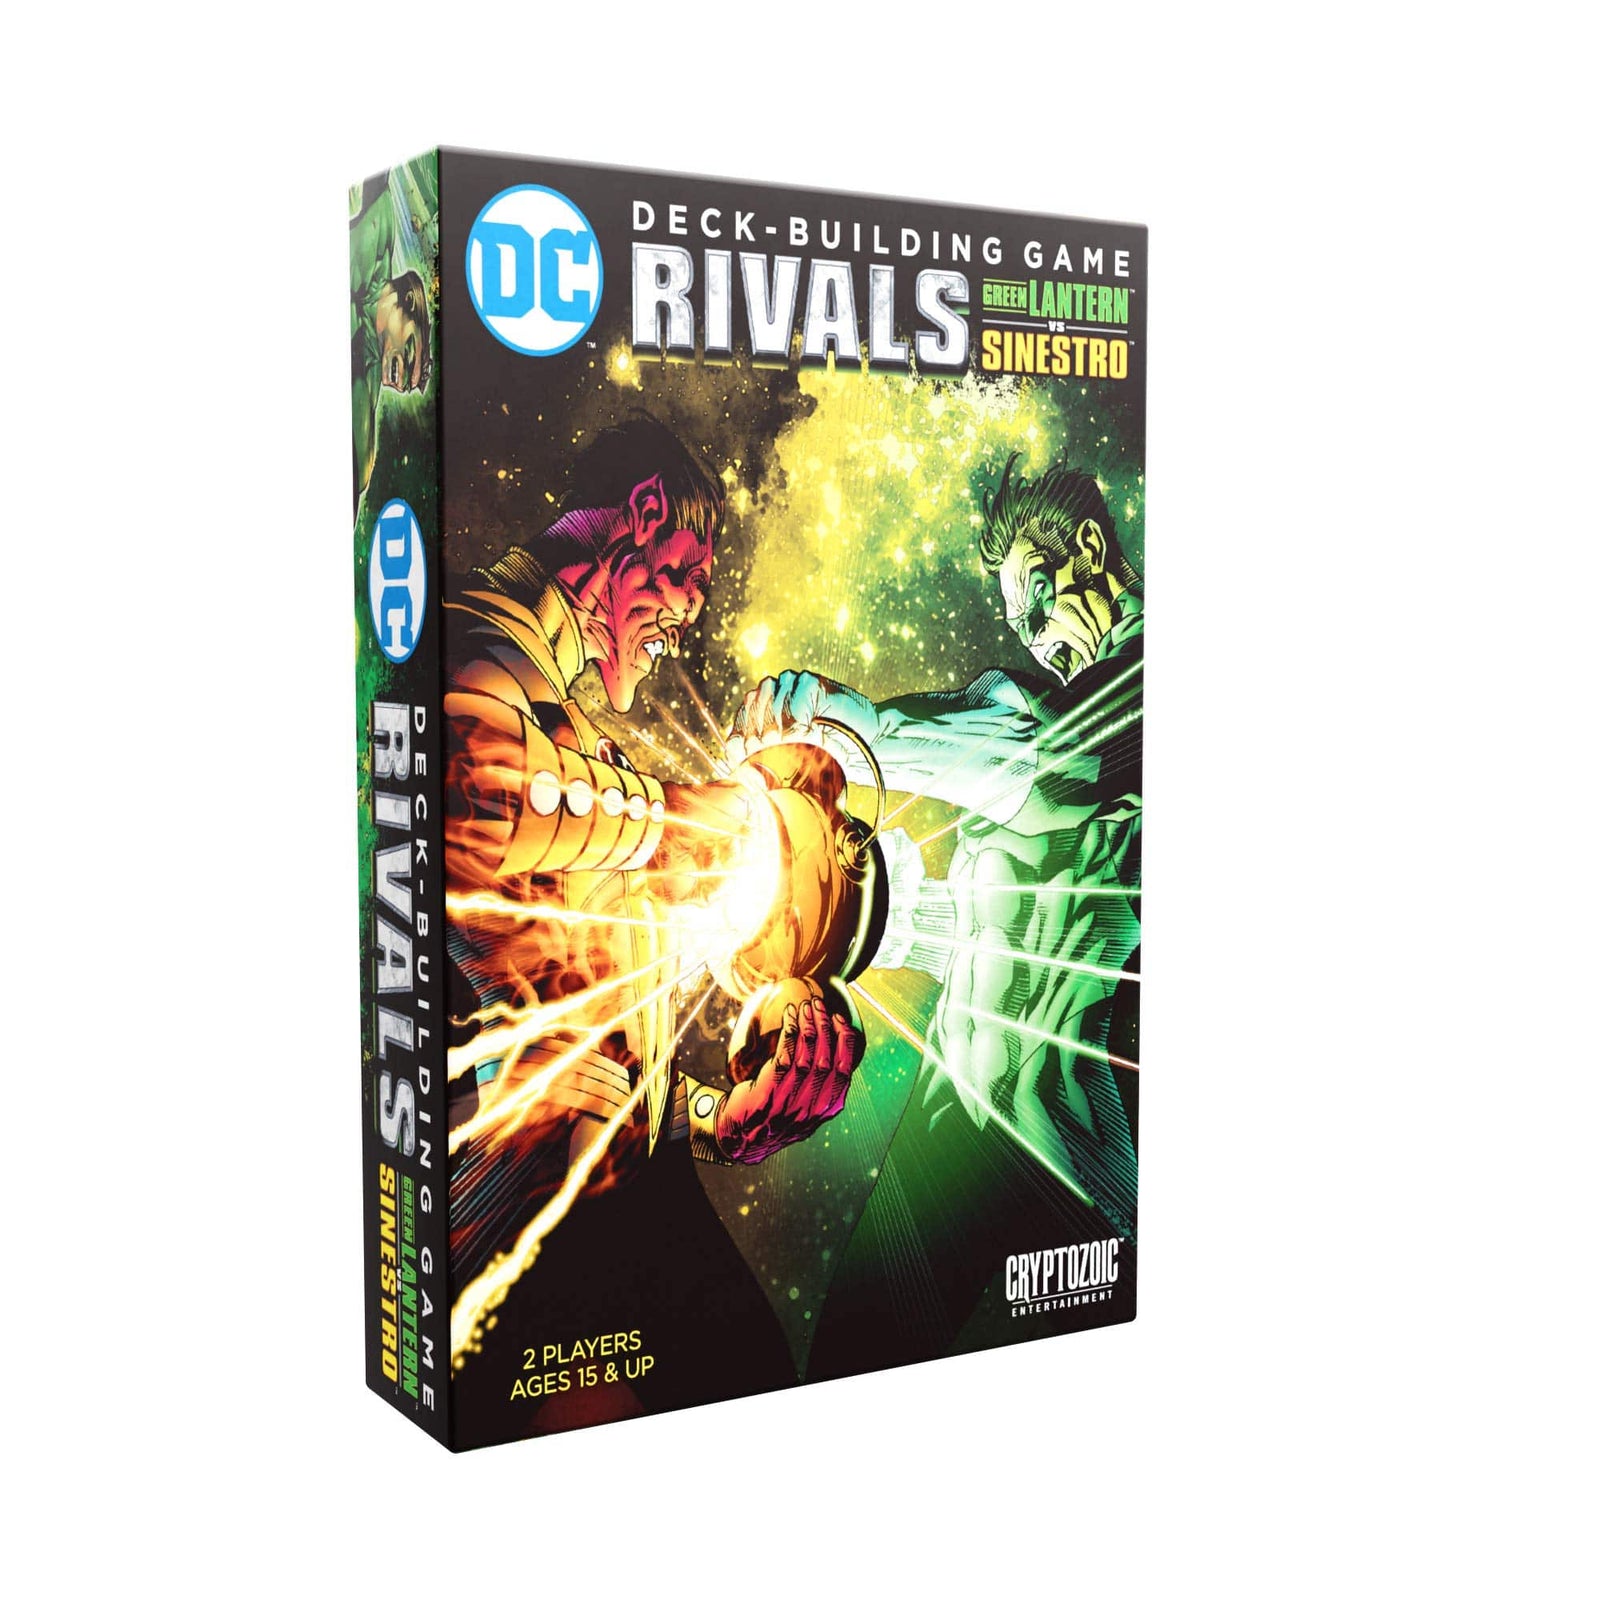 Cryptozoic Entertainment Deck Building Games DC Comics DBG: Rivals - Green Lantern VS Sinestro (stand alone or expansion)